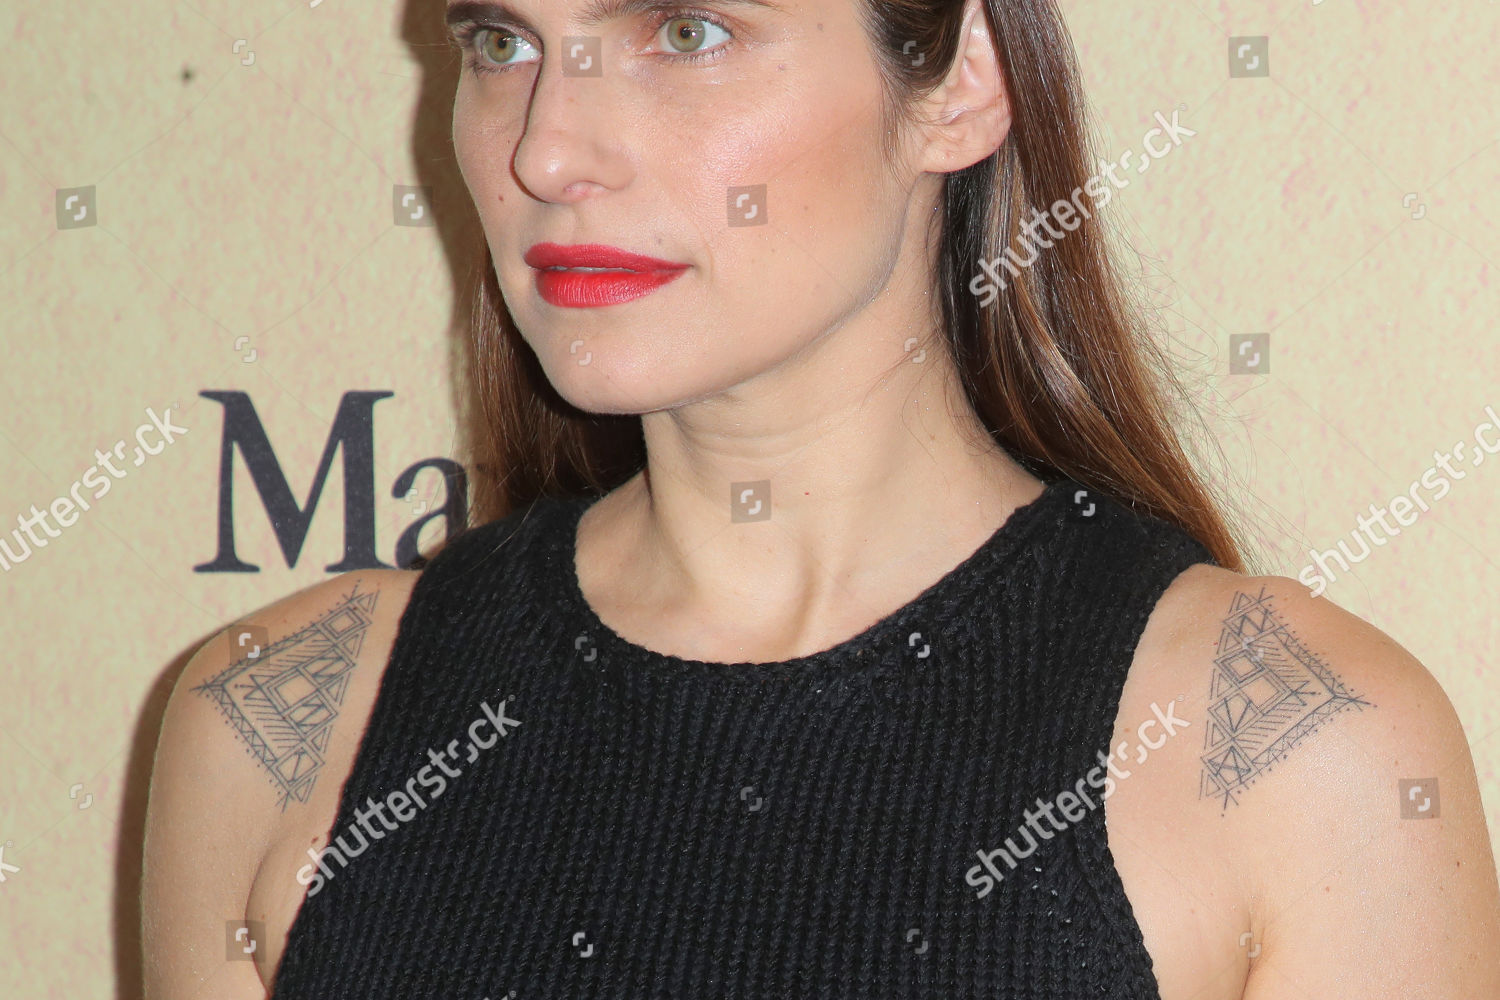 Actress Lake Bell Got Her First Tattoo From Her Husband  Tattoo Ideas  Artists and Models